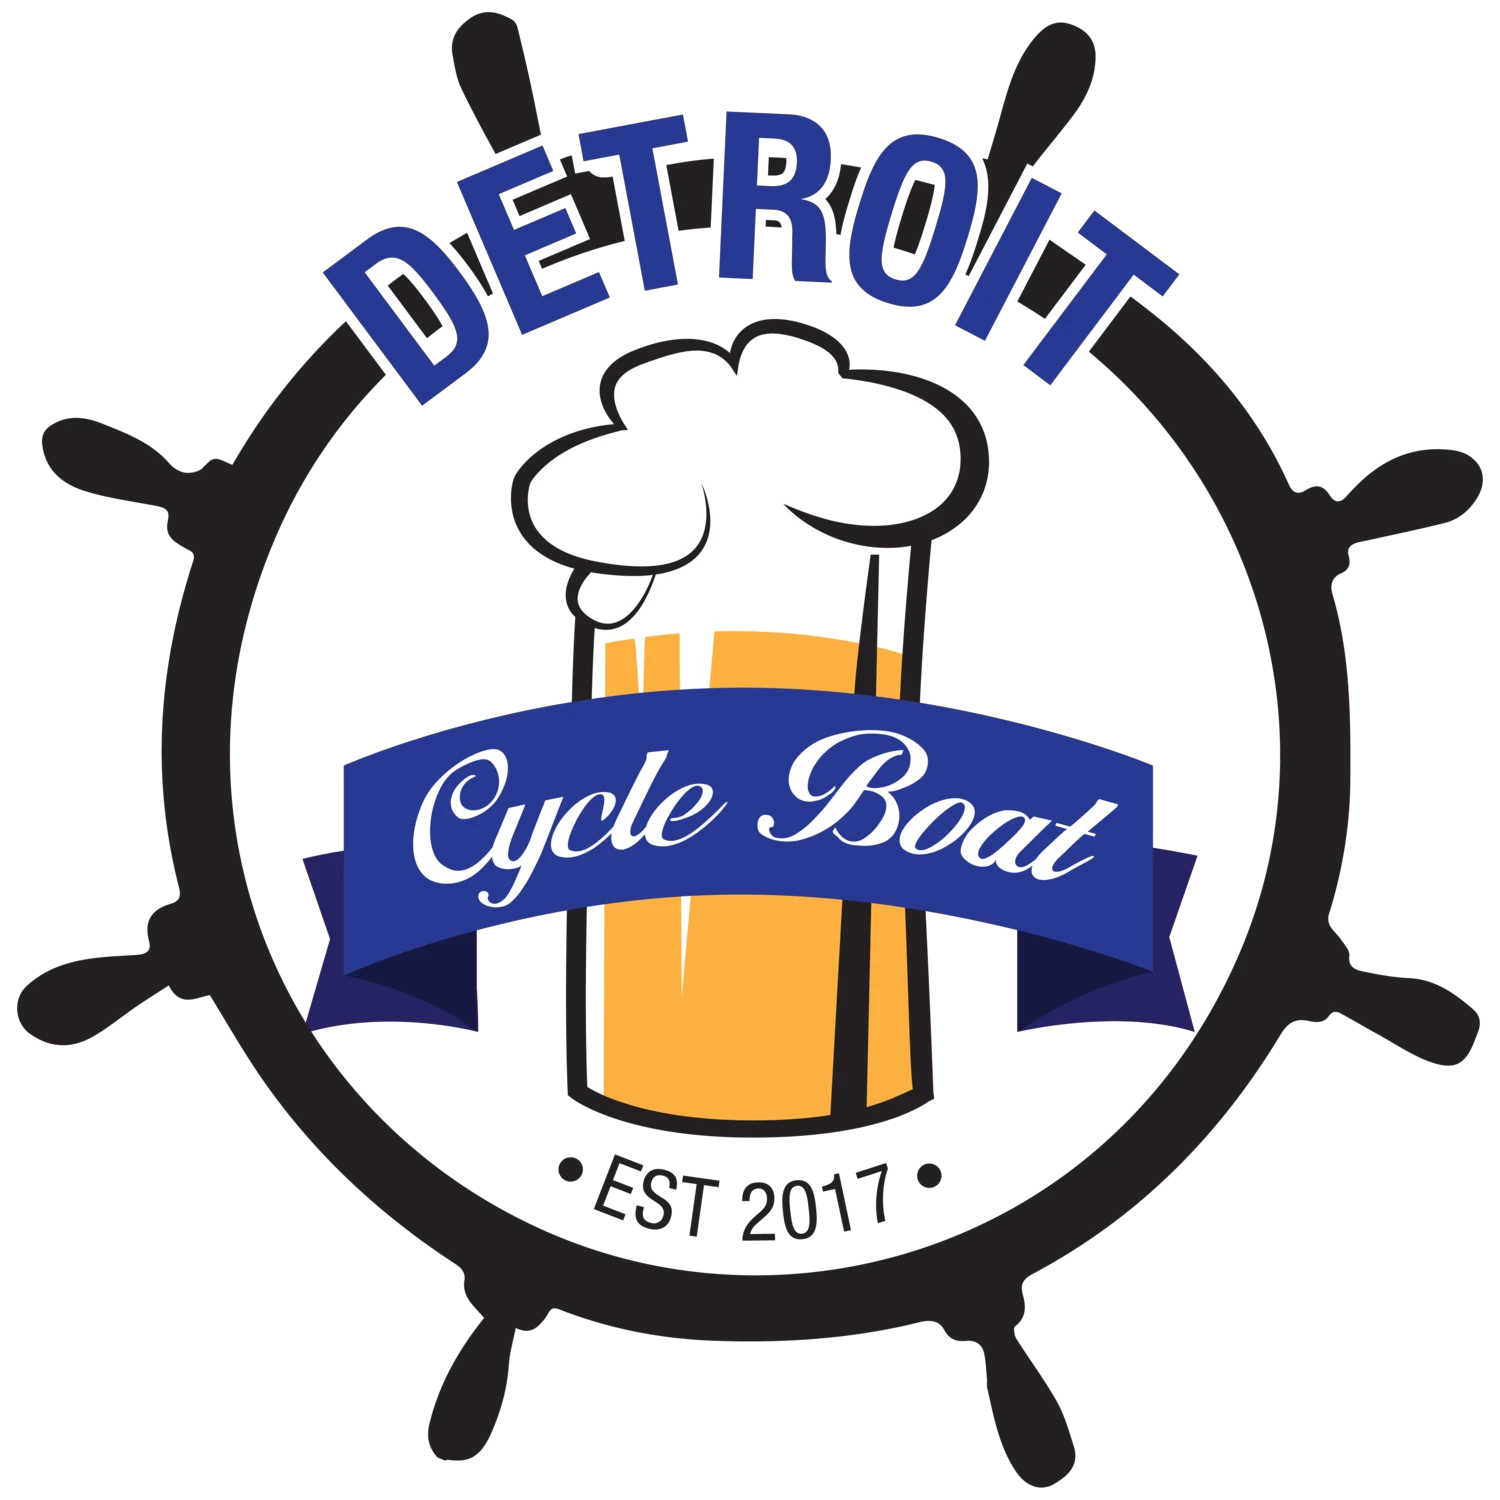 detroitcycleboat.com